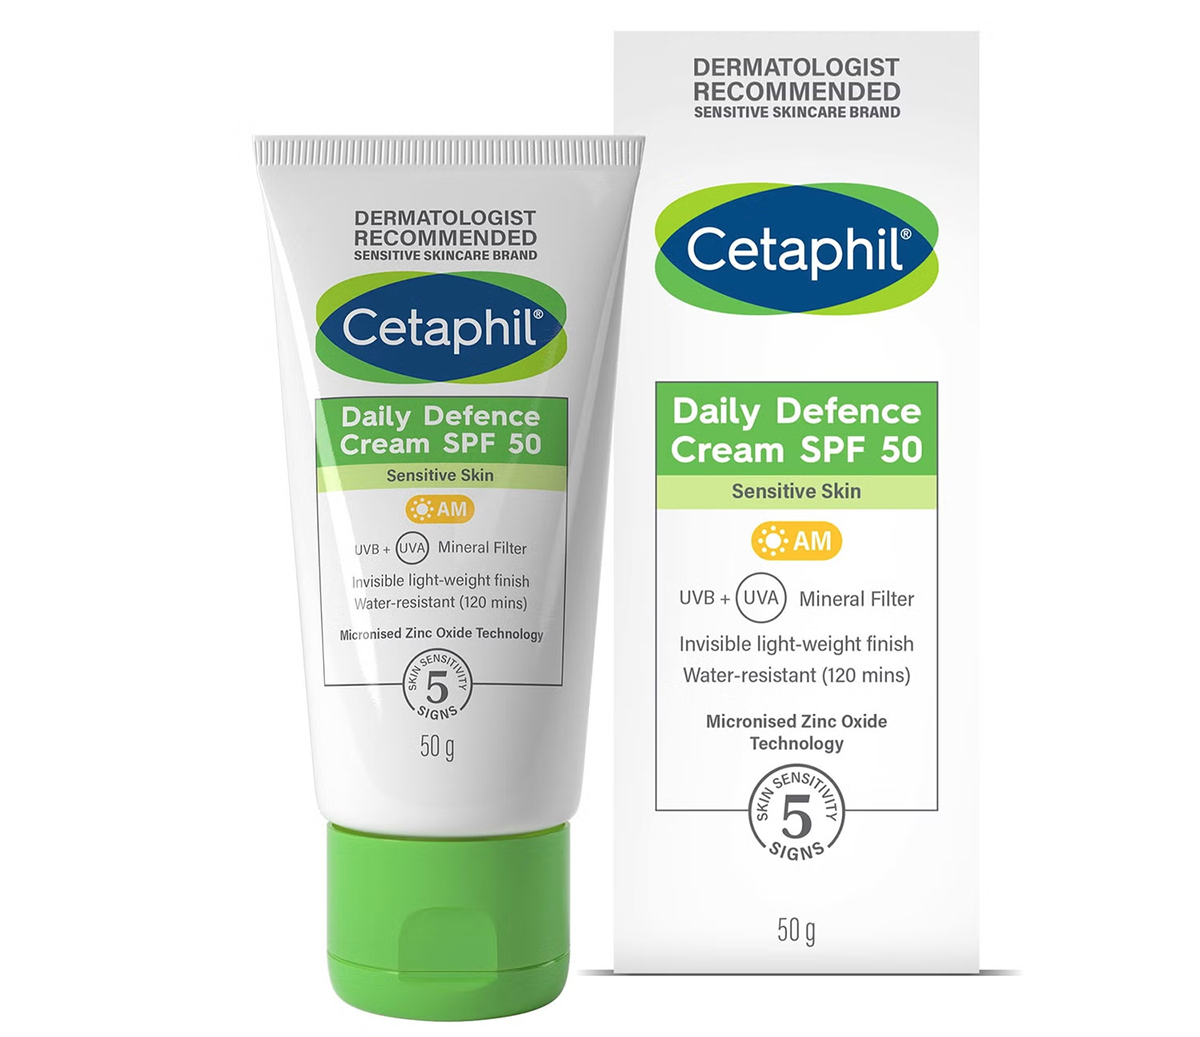 Cetaphil Daily Defence Cream SPF50 with UVA/UVB Filters for Sensitive Skin